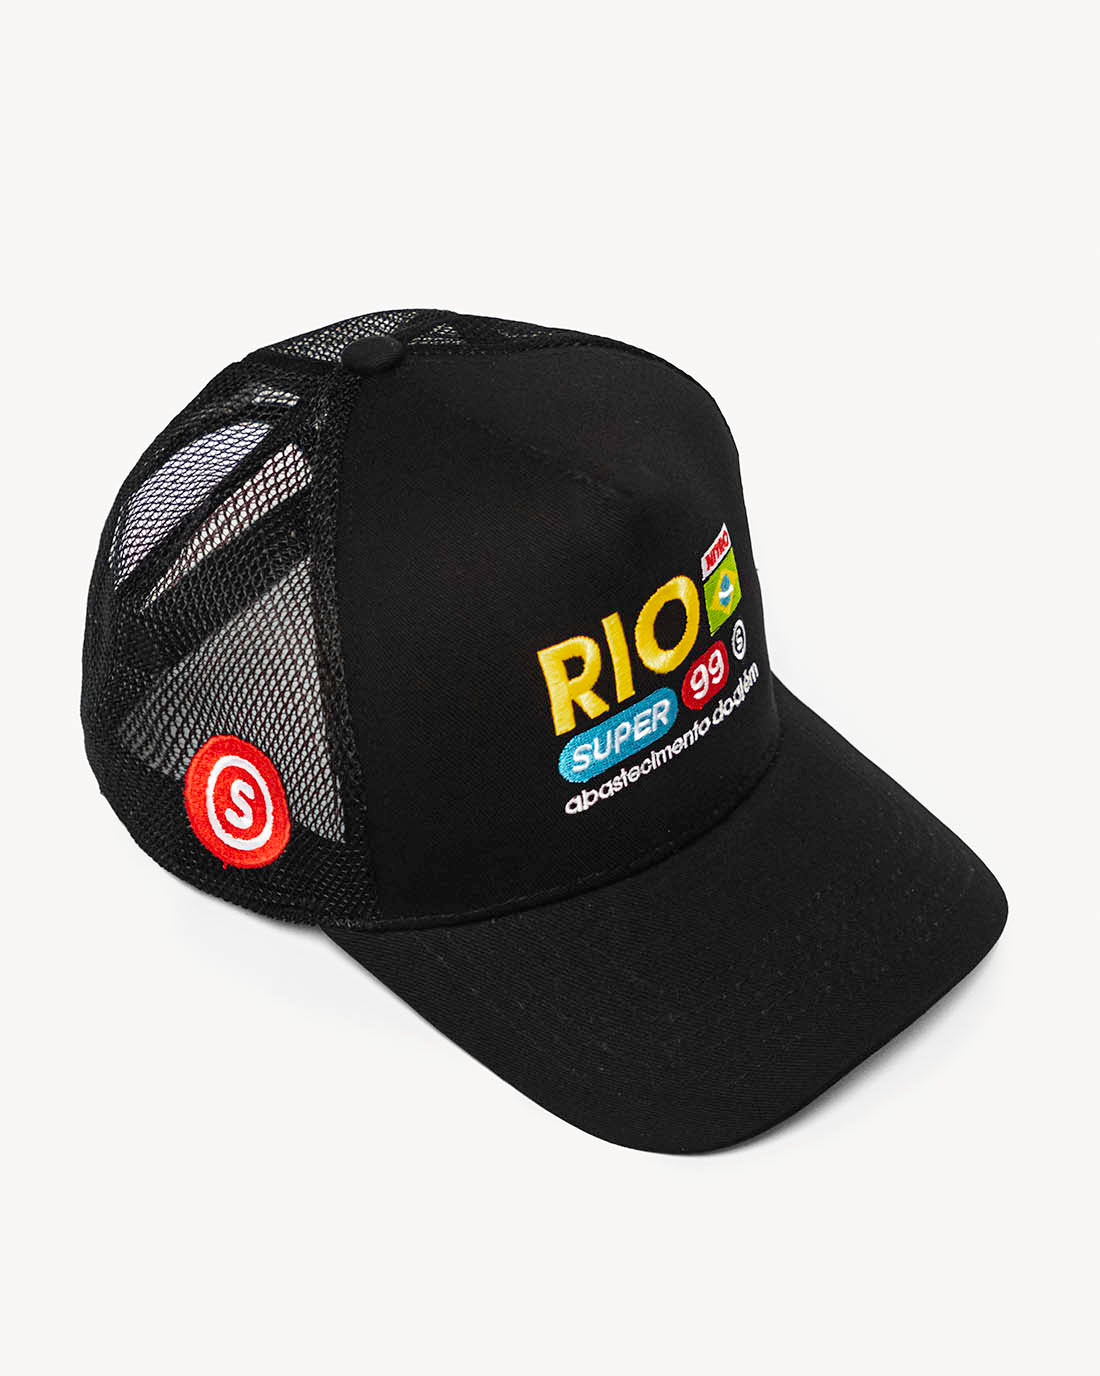 Front side view of a sporty black snapback hat with colorful Brazilian-inspired embroidered design and cooling mesh back.